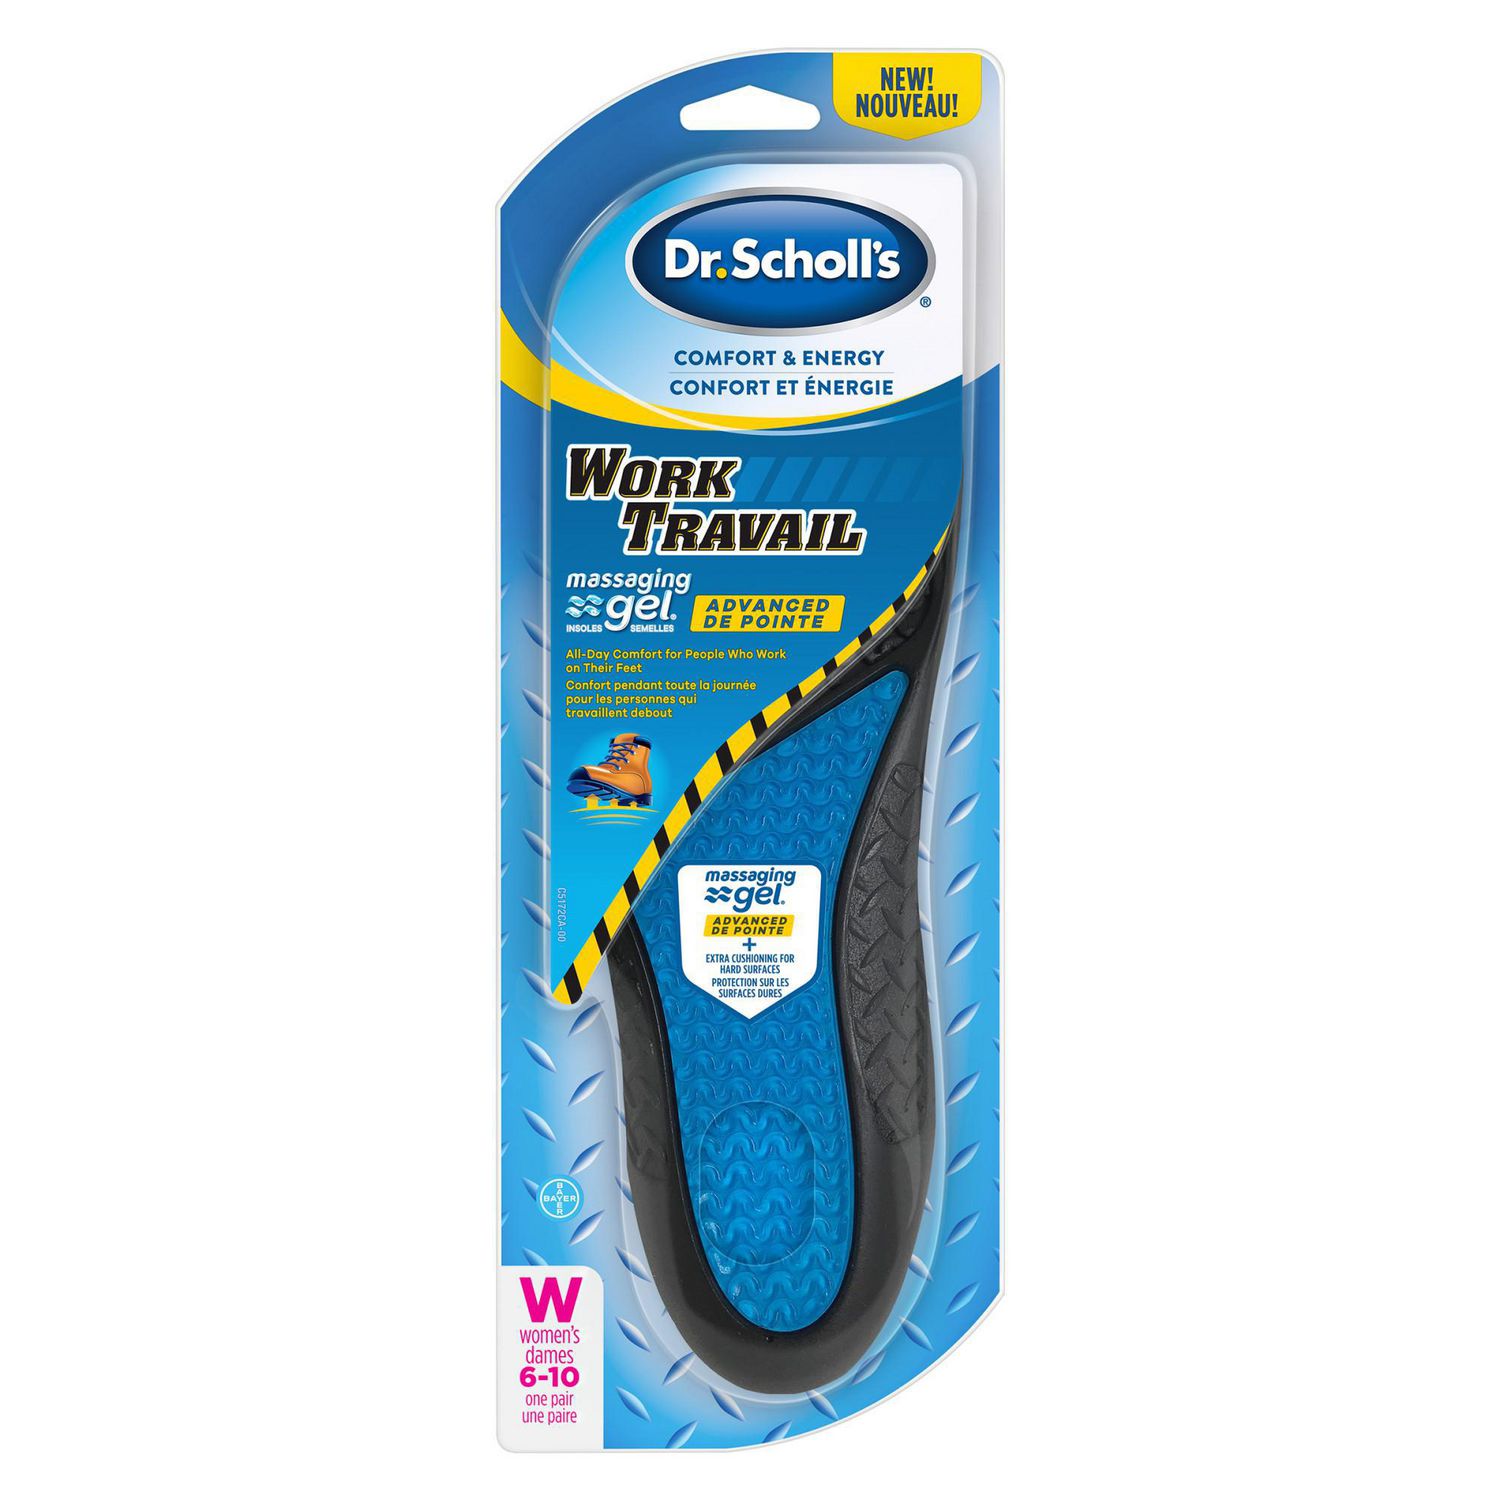 Dr. Scholl’s Comfort & Energy Work Insoles with Massaging Gel Advanced ...